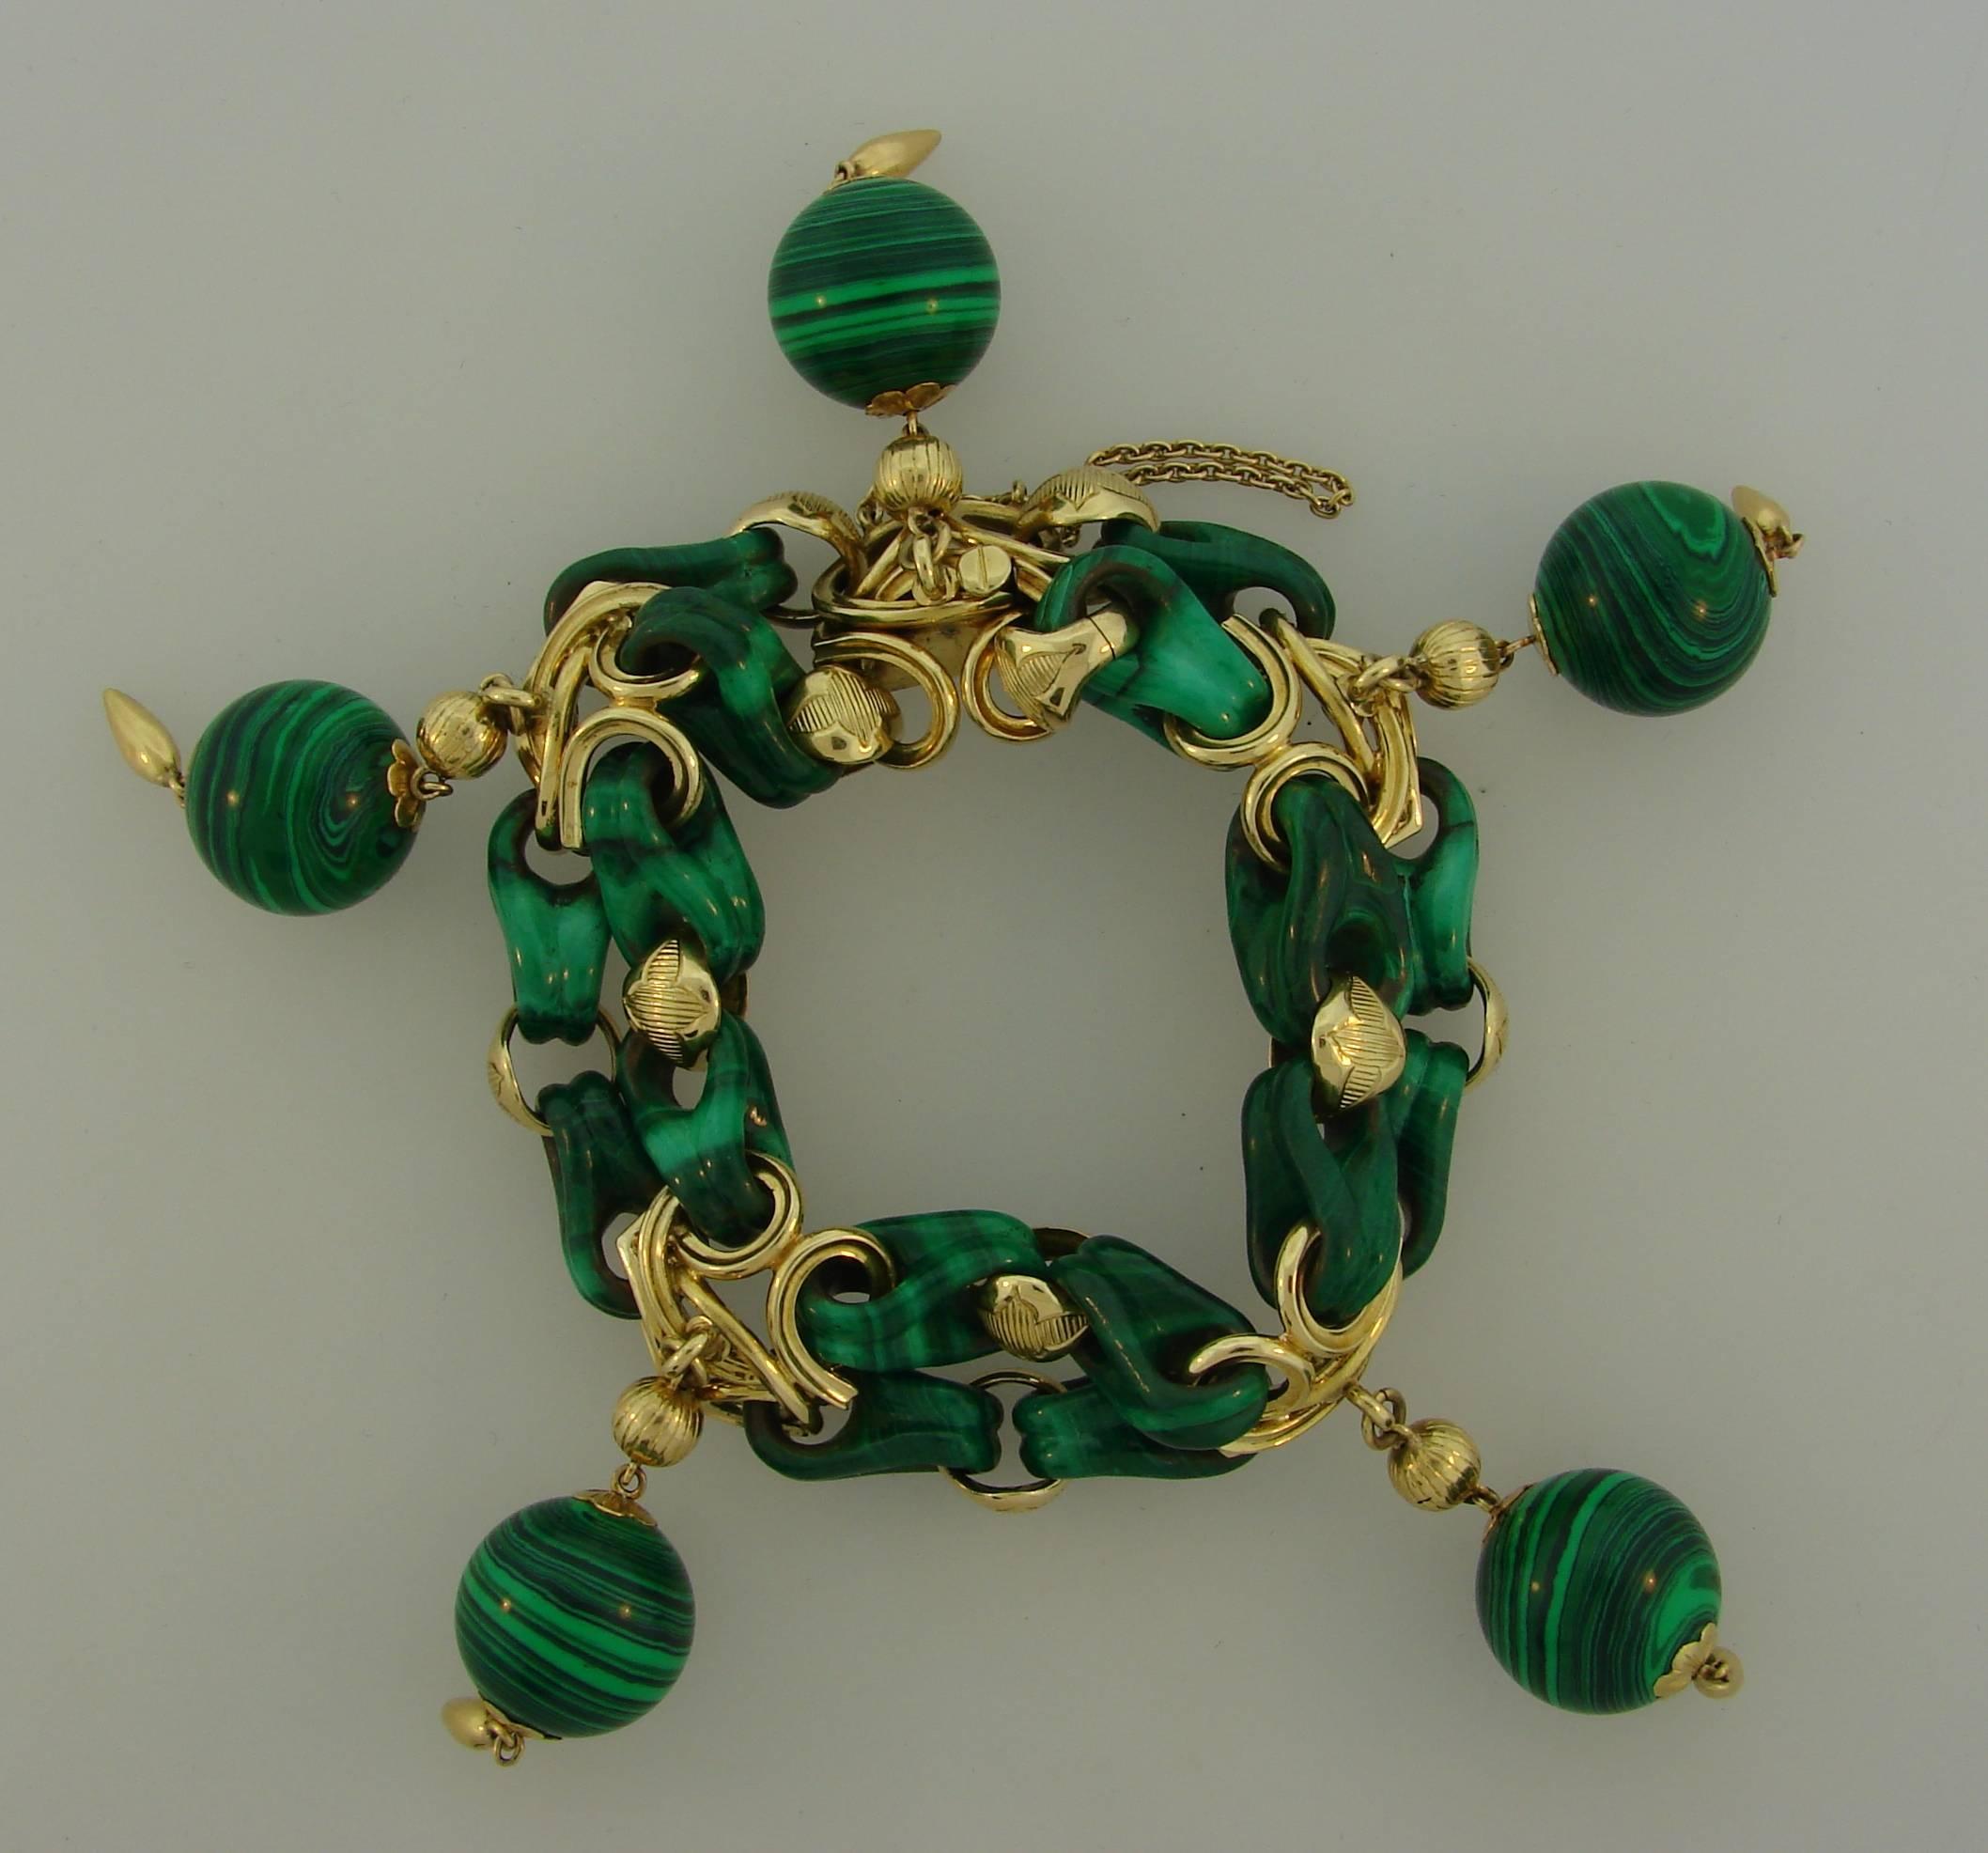 Chic and colorful bracelet created in France in the 1970's. Wearable and fun, it is a great addition to your jewelry collection. 
The bracelet is made of 18 karat yellow gold and malachite. The malachite is skillfully carved to create these unique